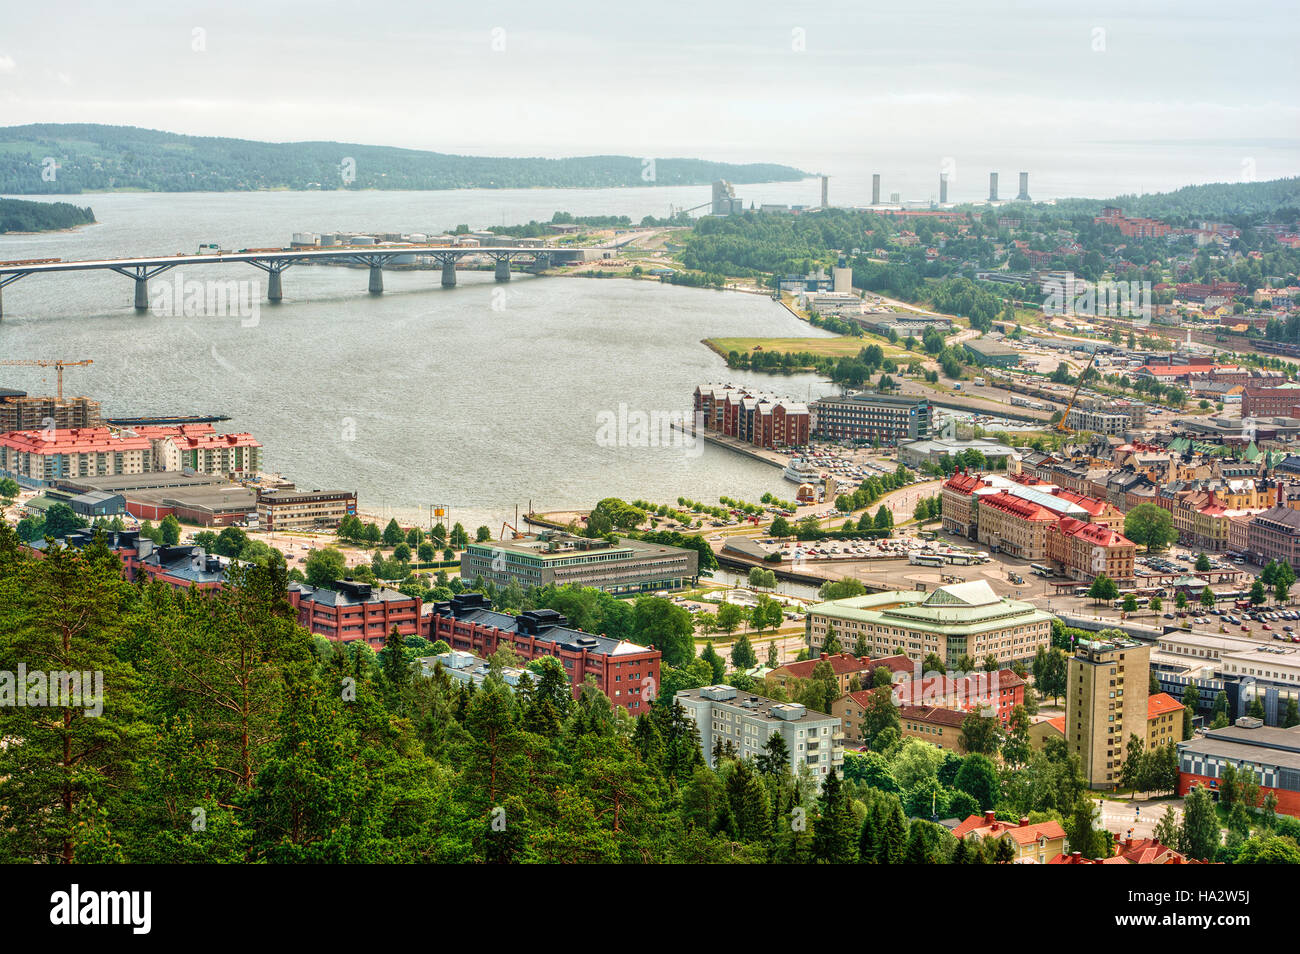 Aerial view of Sundsvall, Sweden Stock Photo - Alamy